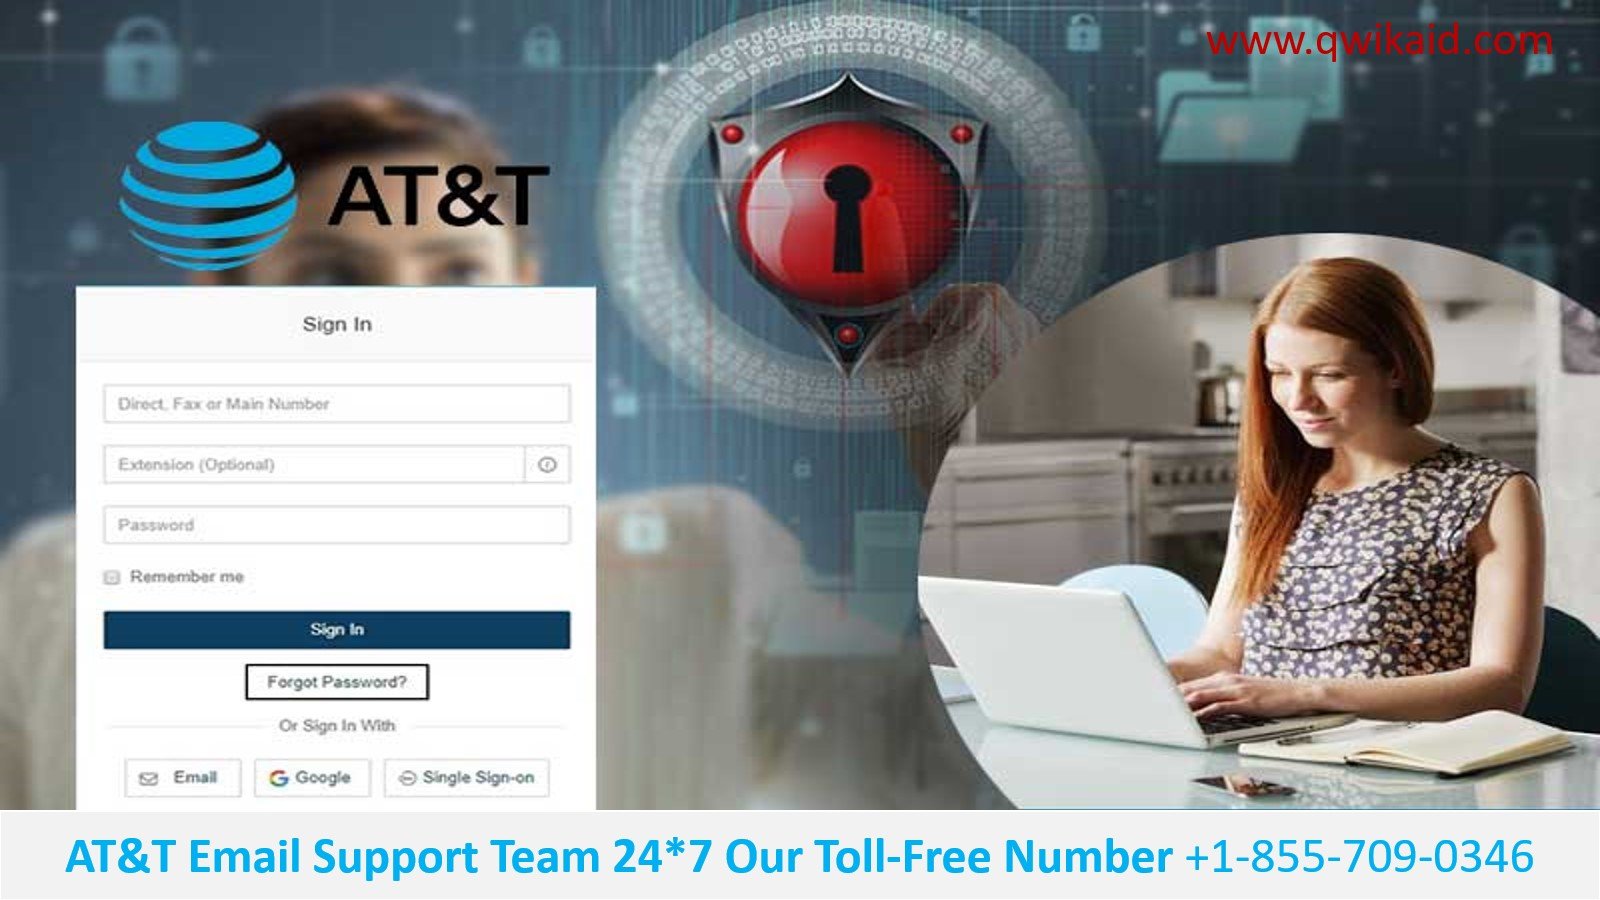 HOW TO #CHANGE OR RESET AT&T EMAIL PASSWORD?